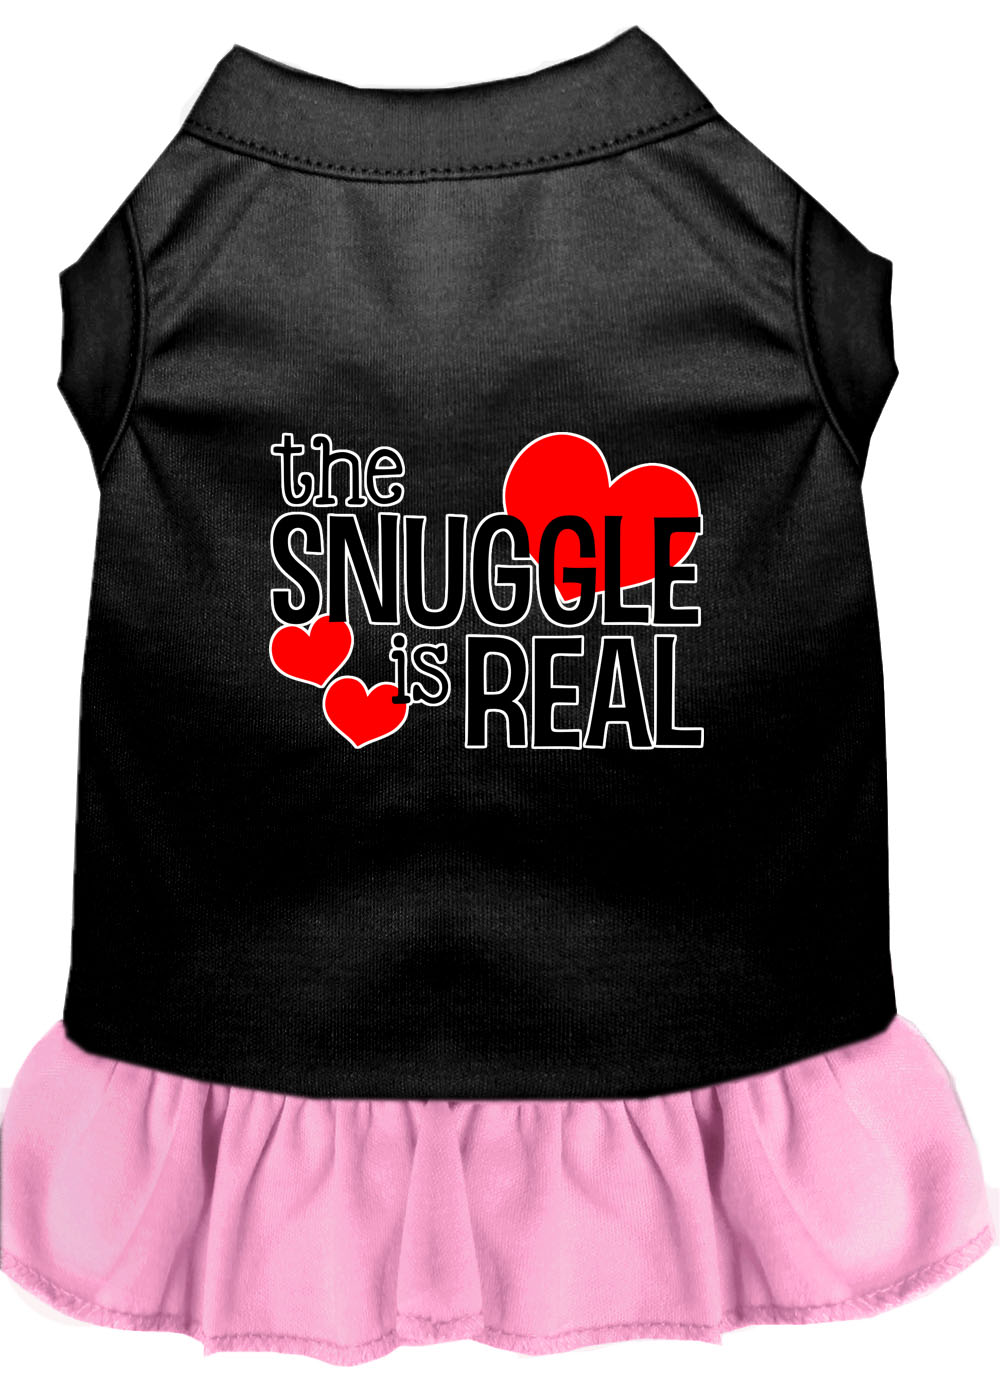 The Snuggle is Real Screen Print Dog Dress Black with Light Pink XXXL